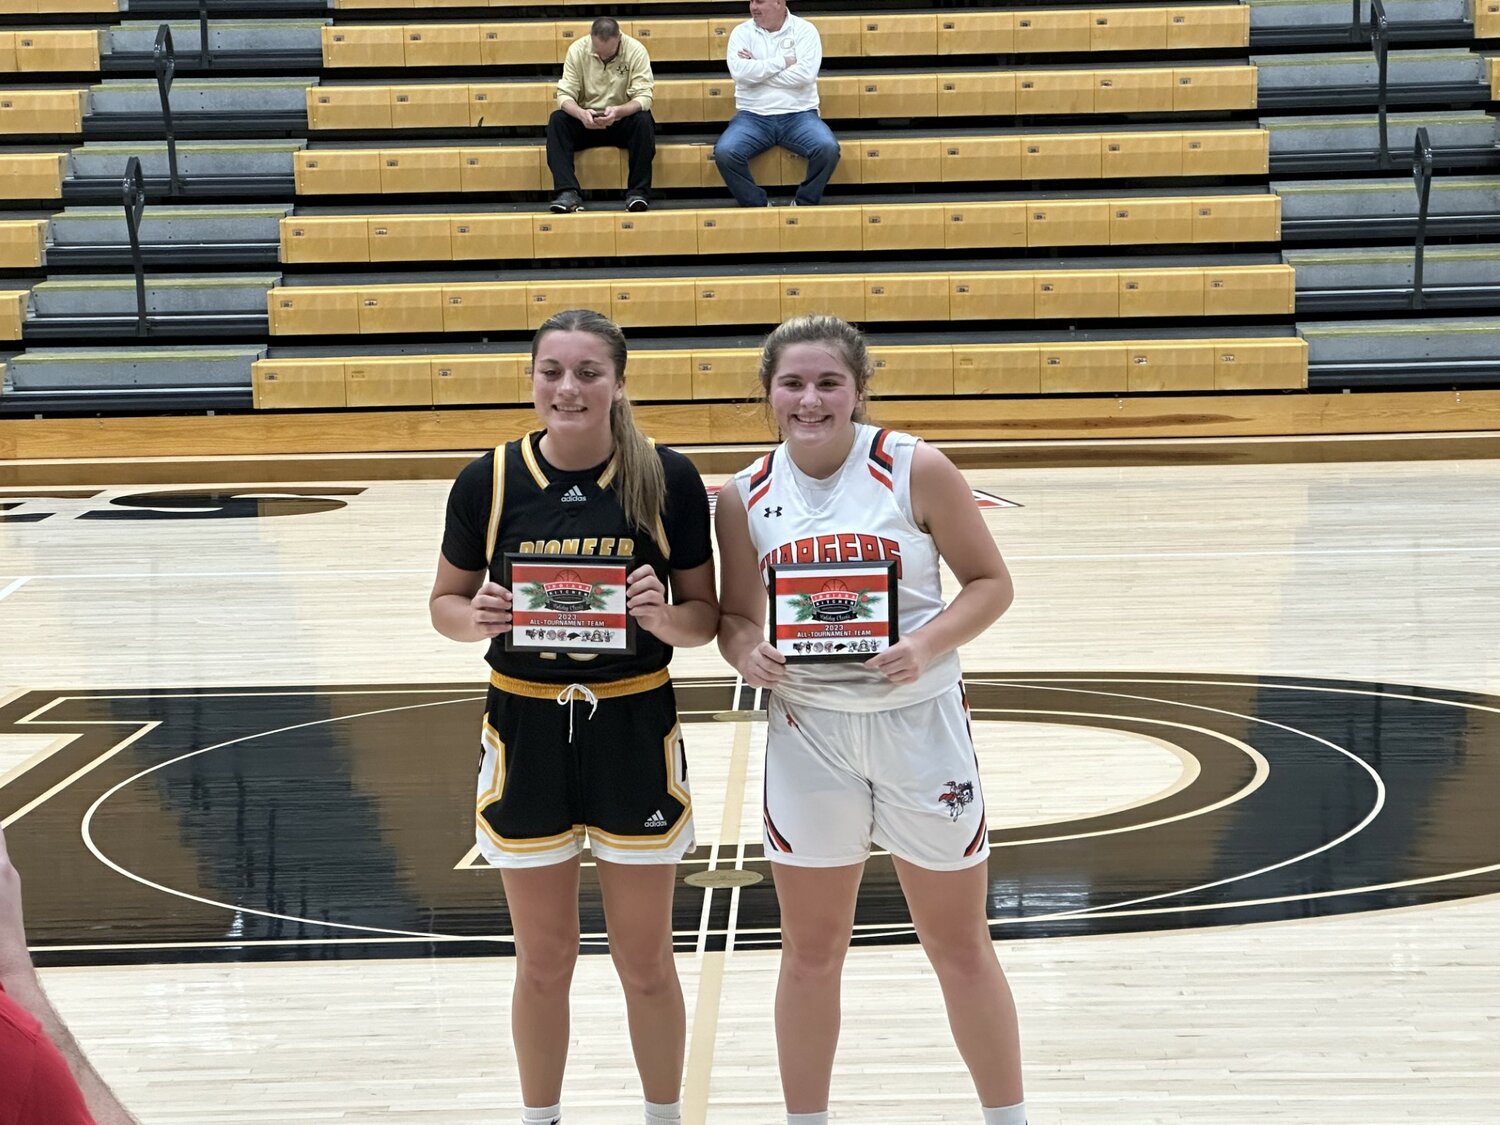 North Montgomery's Macee Norman was selected to the Delphi Kitchen Classic All-Tournament team for her 2 straight games of scoring 23 points as the Chargers brought home 3rd place.